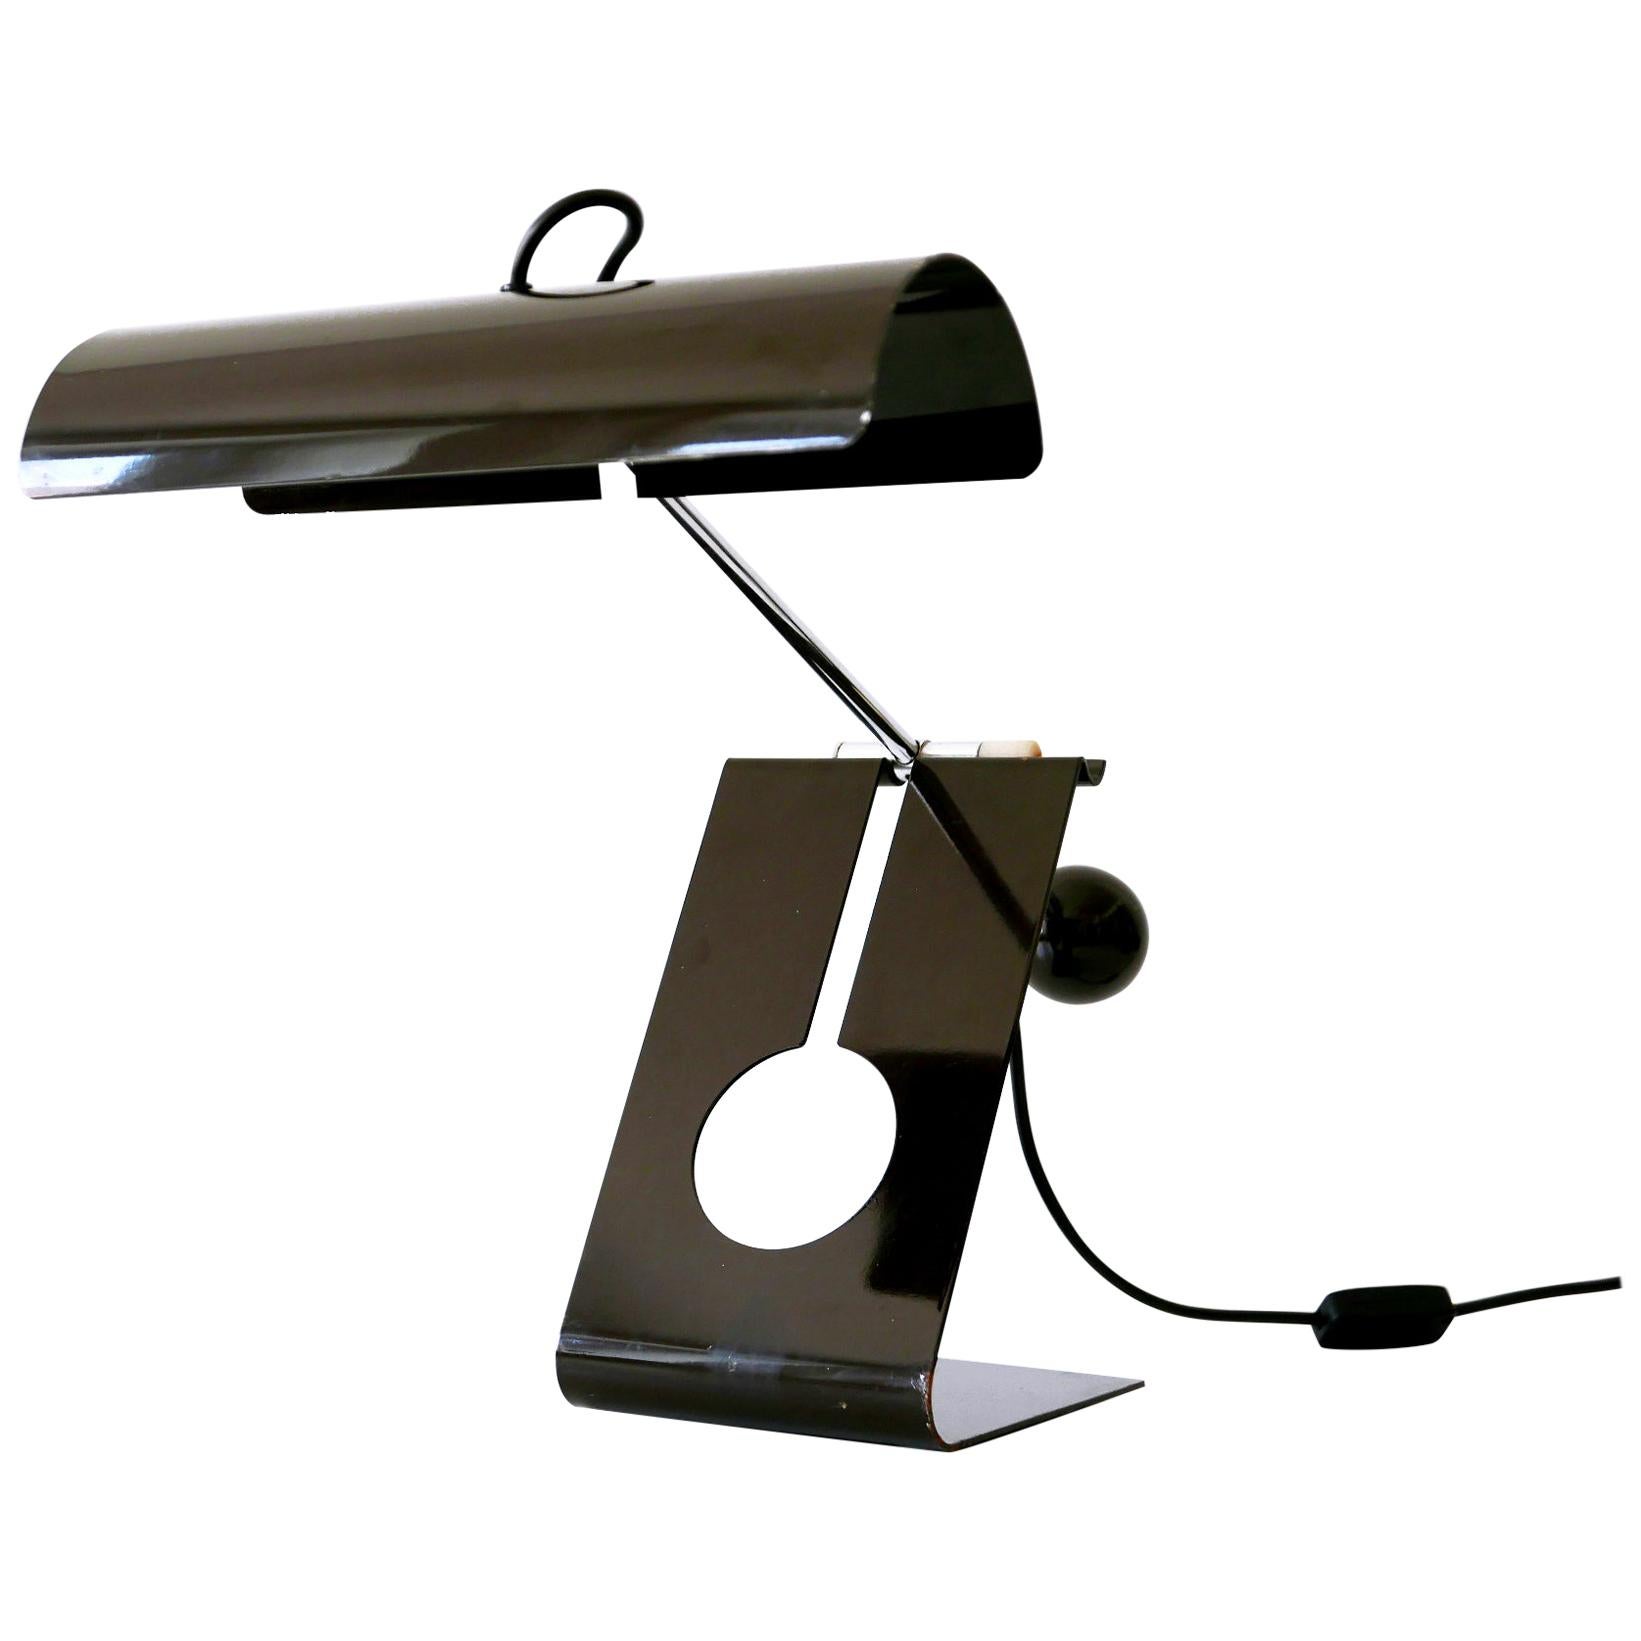 Articulated Table Lamp Picchio by Mauro Martini for Fratelli Martini 1970s Italy